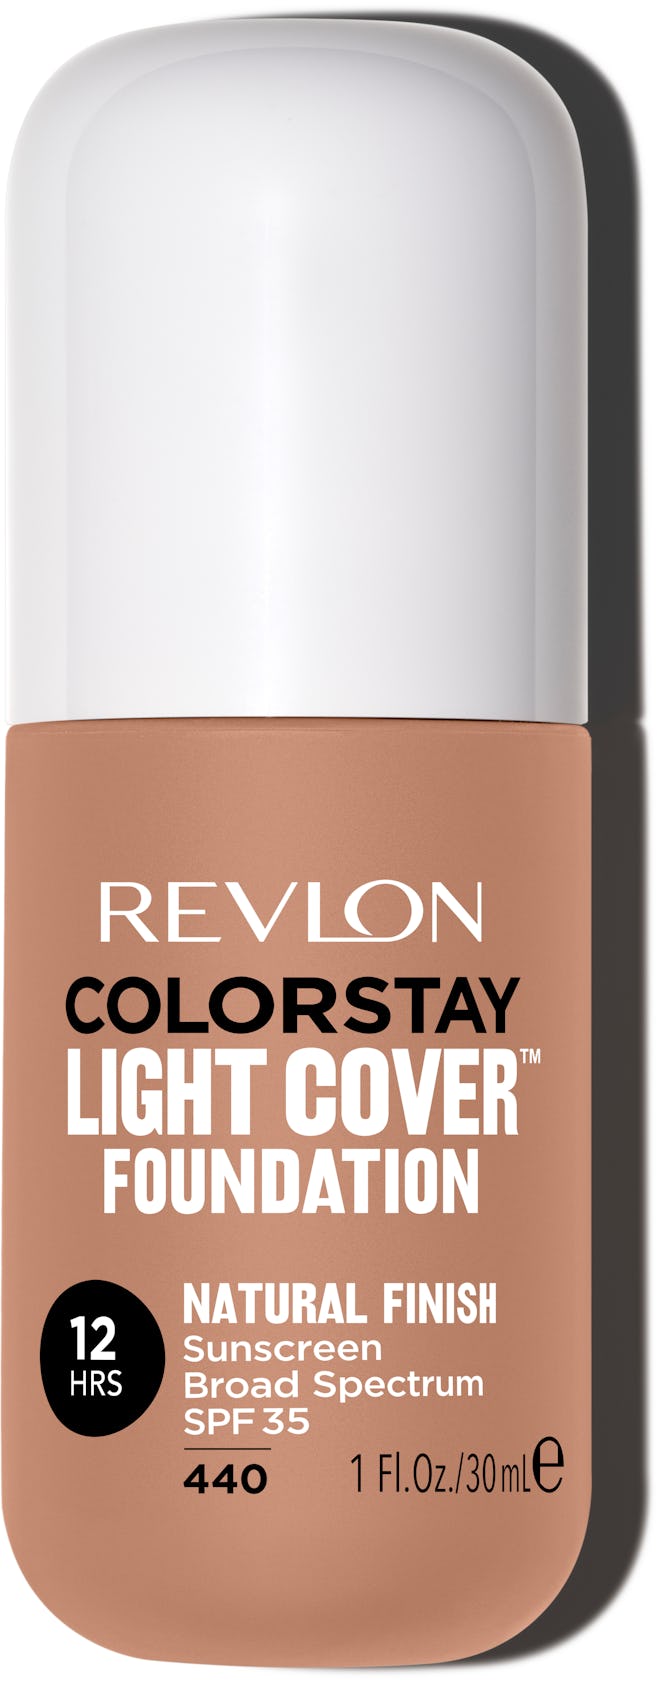 Colorstay Light Cover Foundation